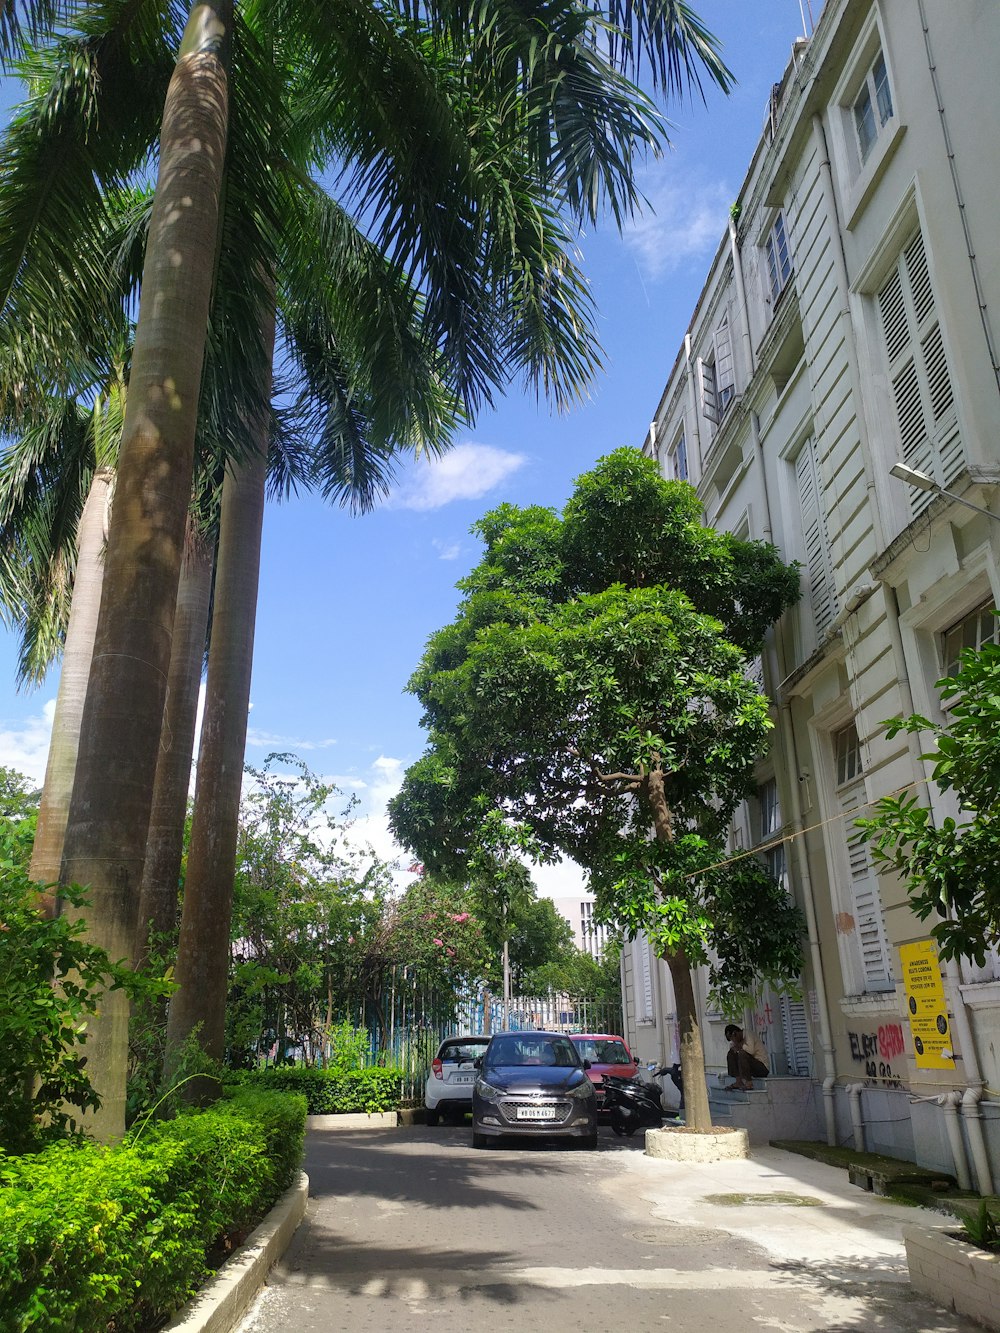 a street with cars parked on the side and trees on the side